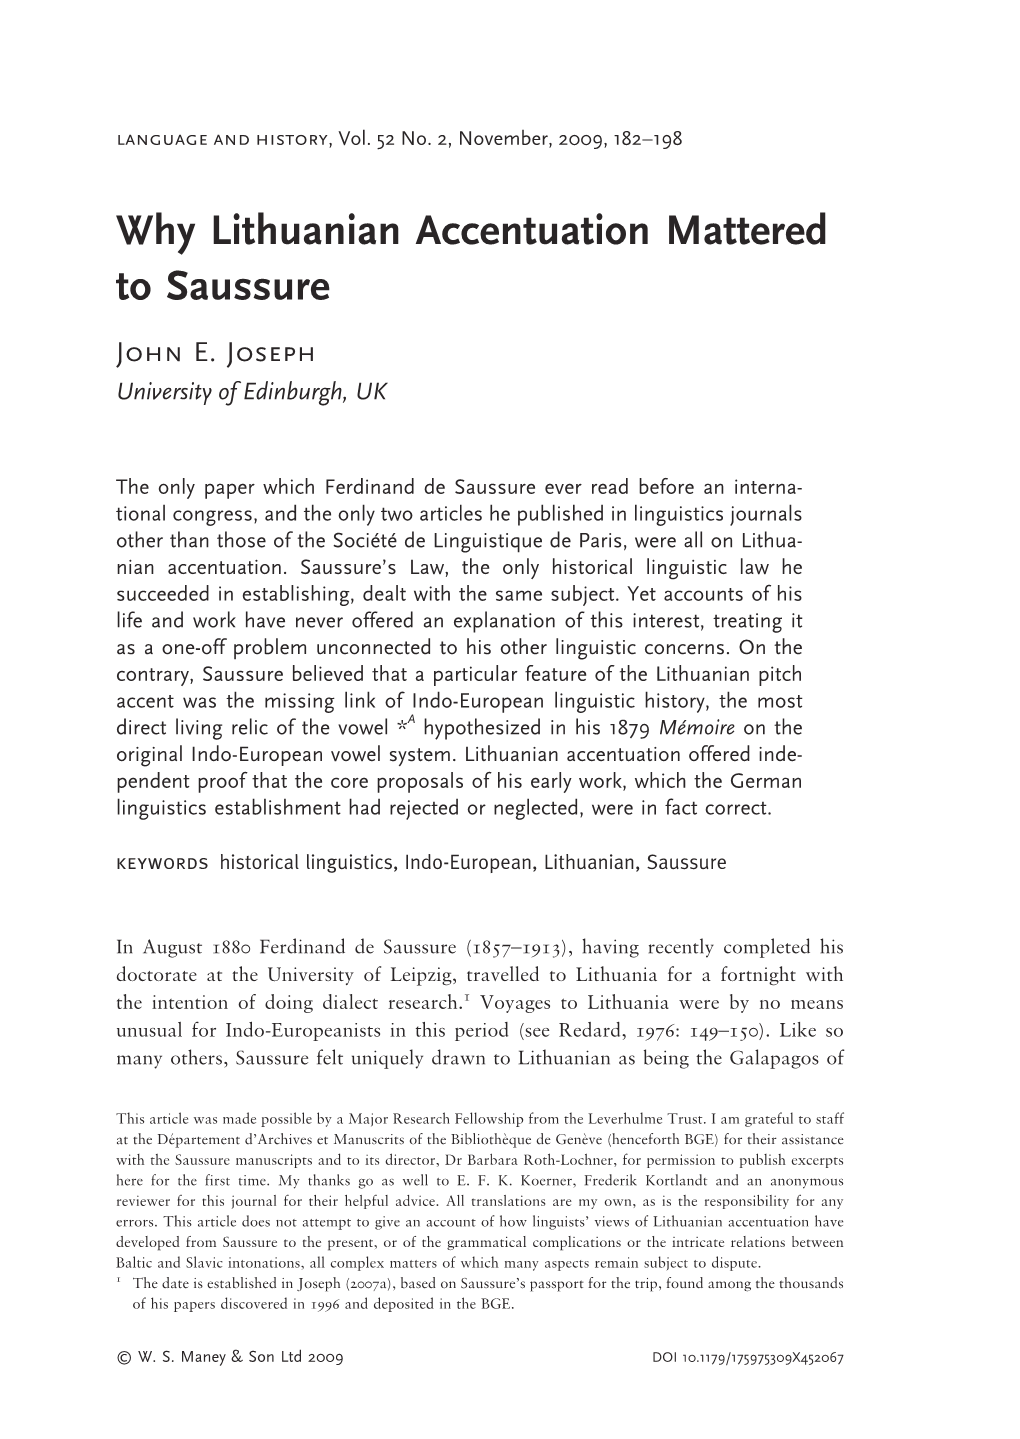 Why Lithuanian Accentuation Mattered to Saussure John E